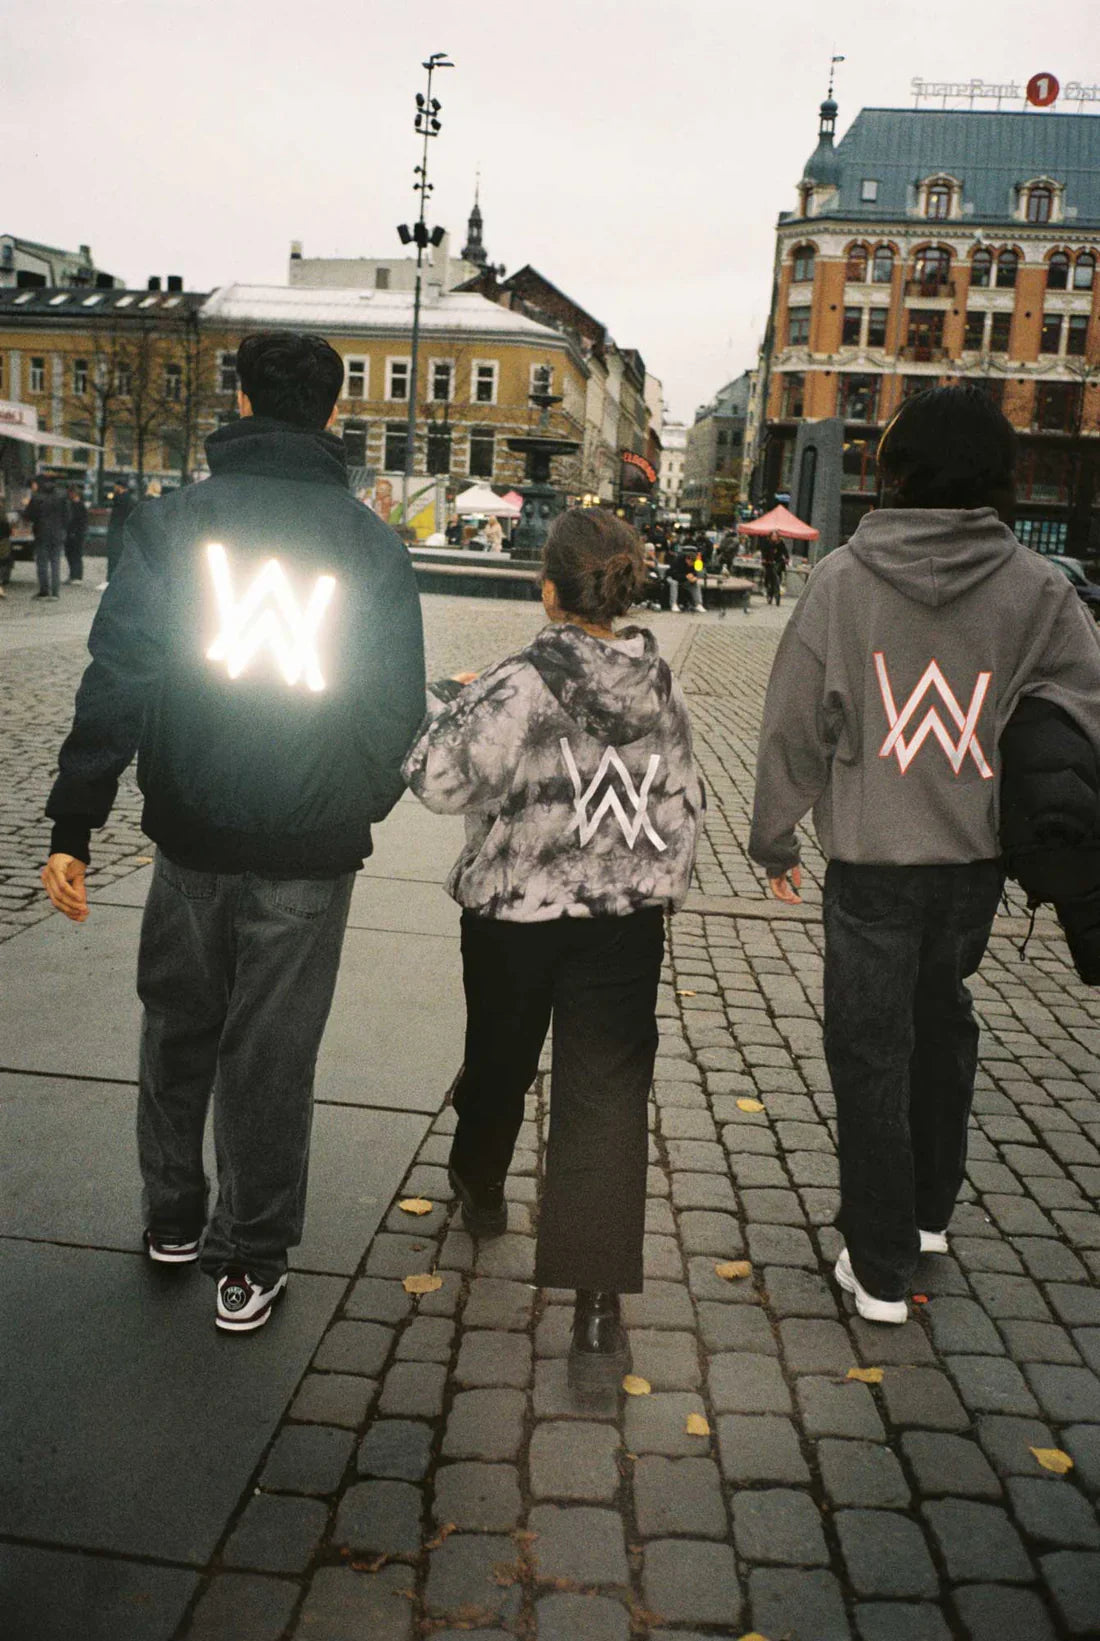 Three friends walking through a city square, one with a glowing Alan Walker logo on their jacket, flanked by two others in Alan Walker hoodies.